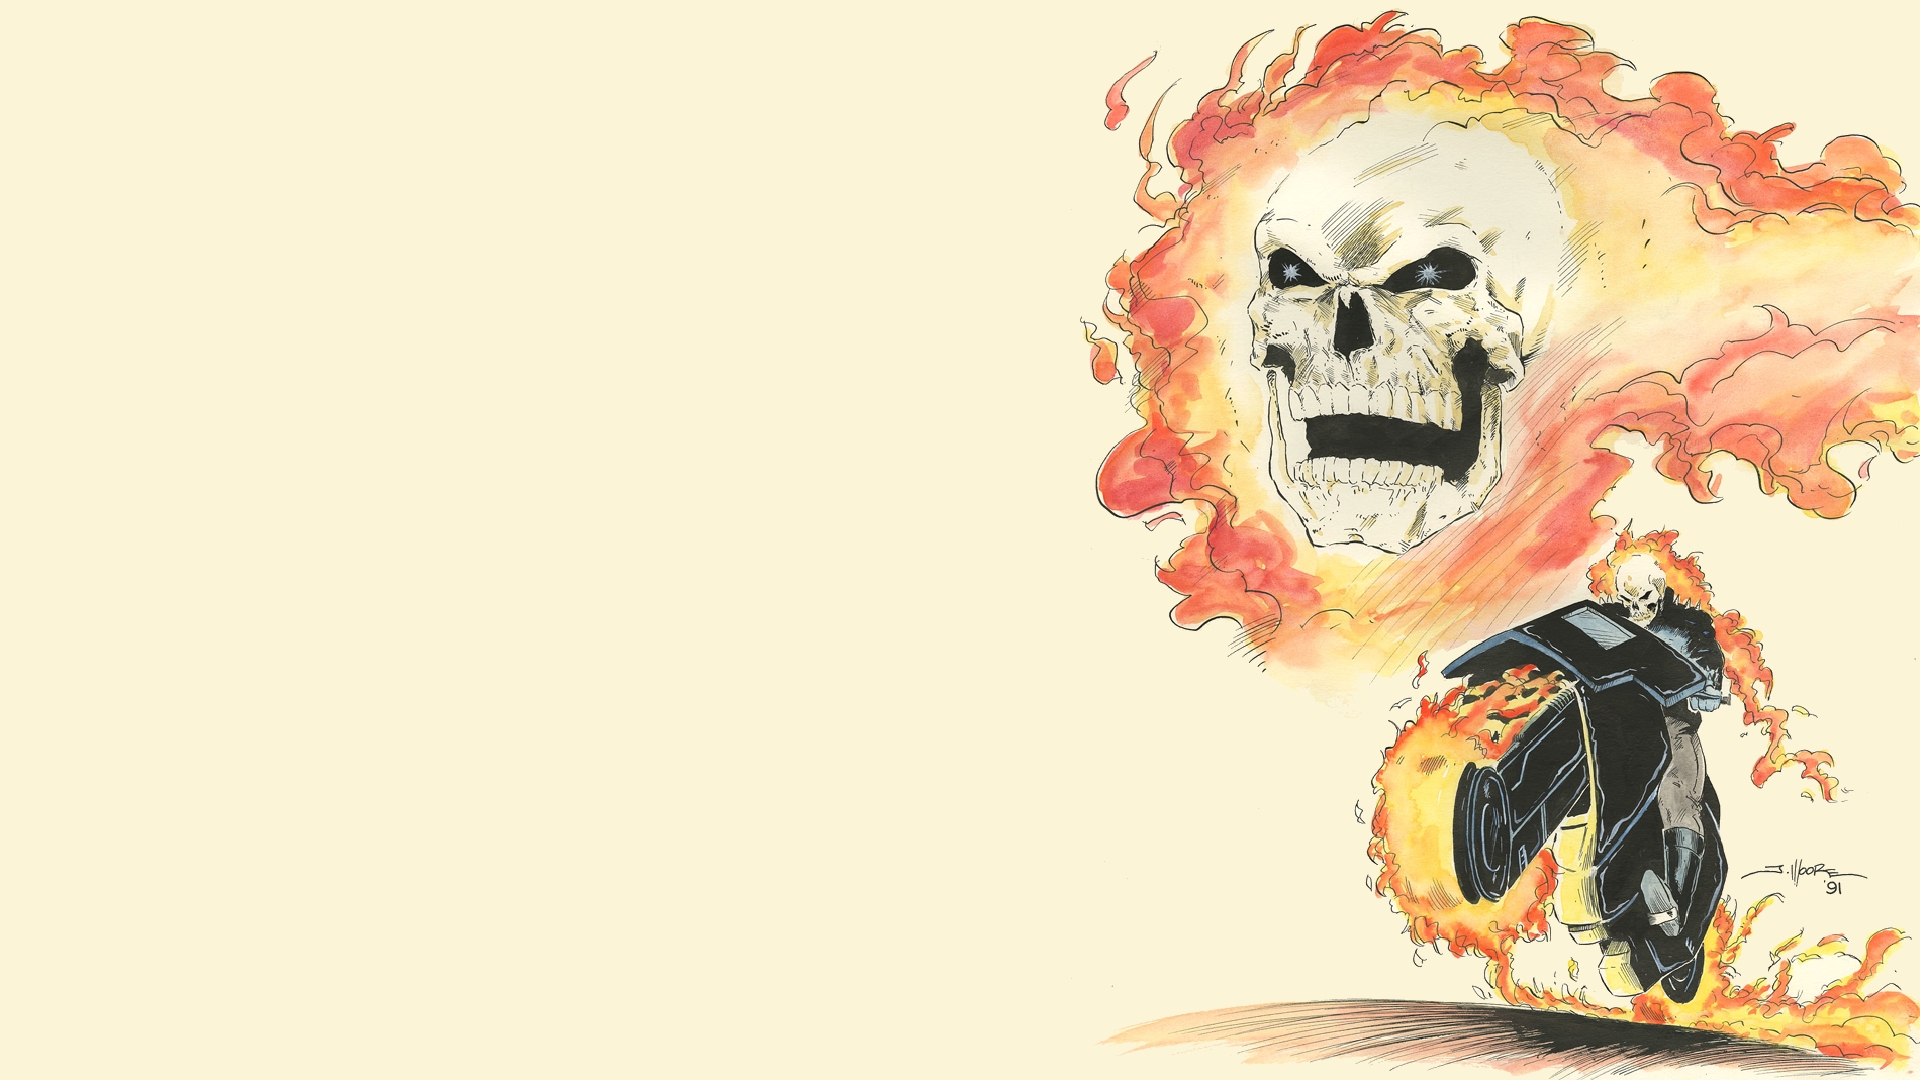 Comics Ghost Rider HD Wallpaper | Background Image